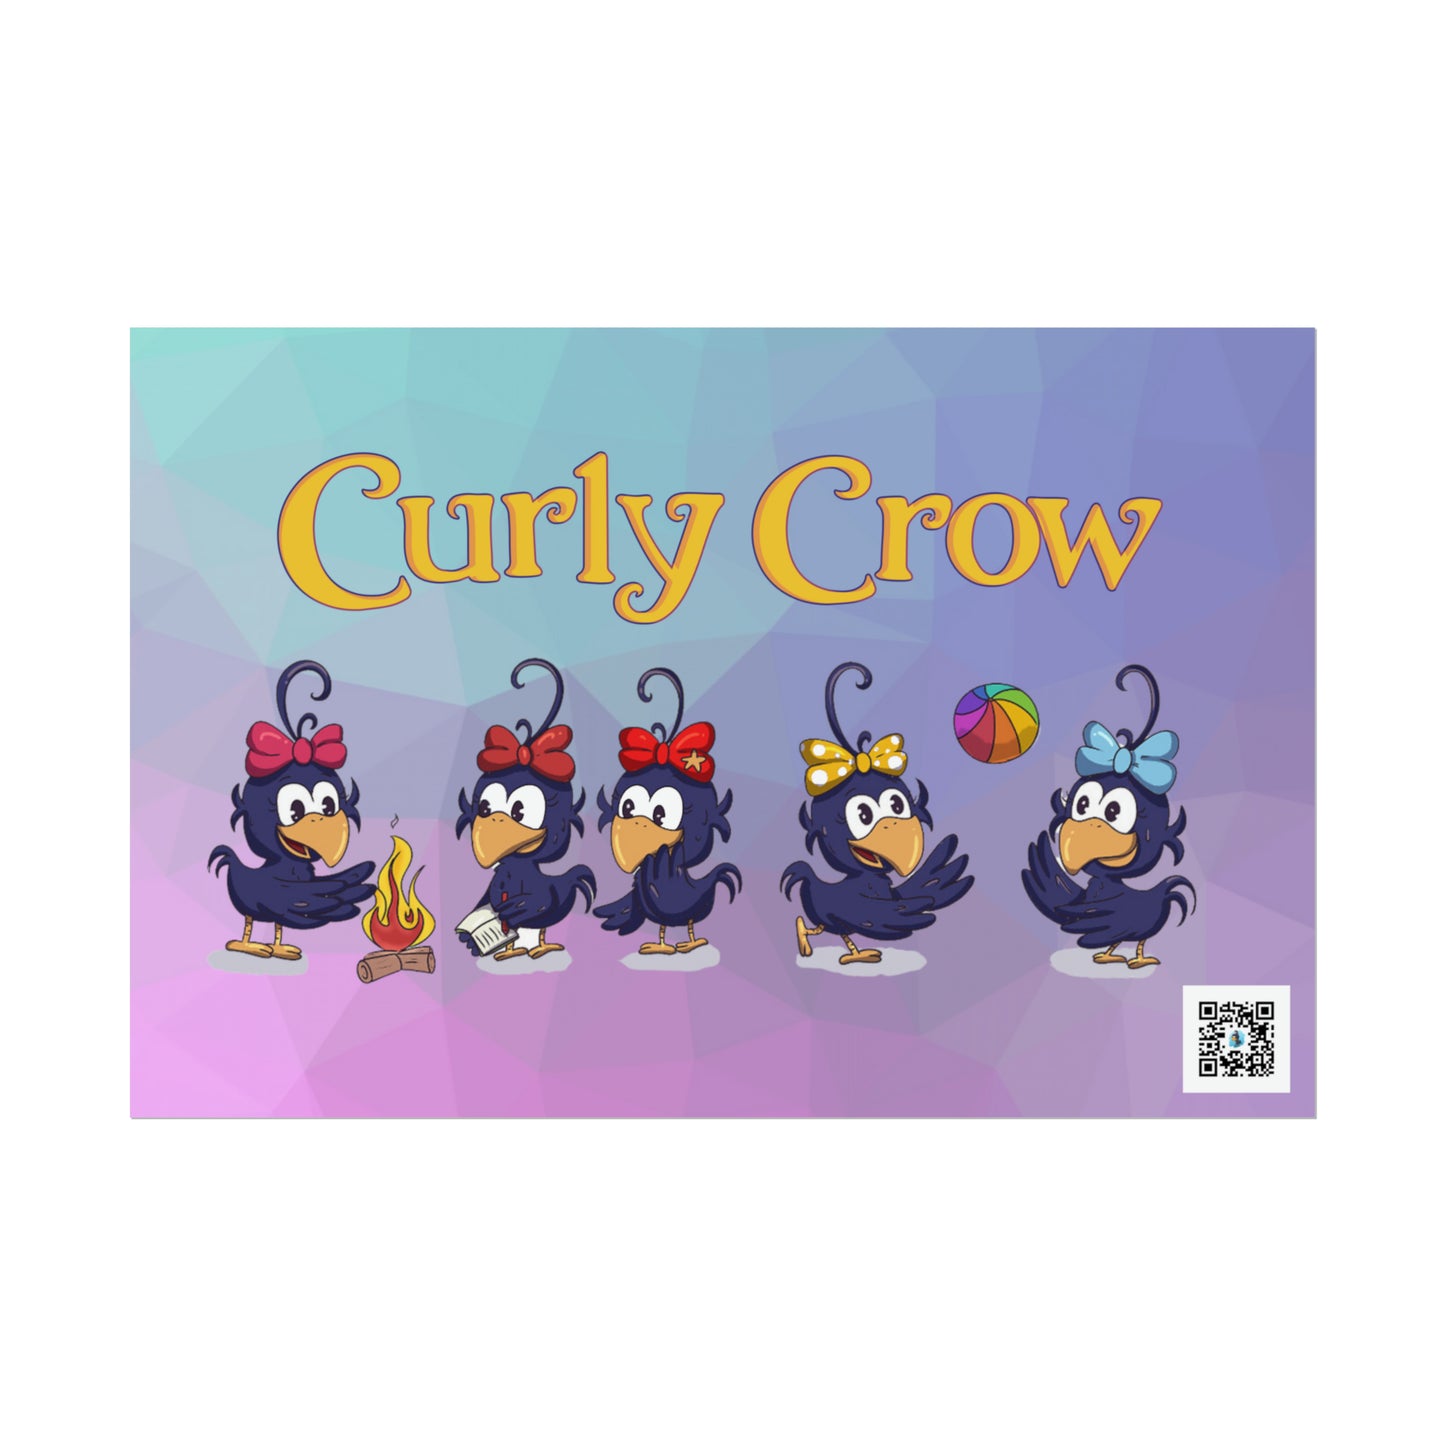 Curly Crow Series Poster